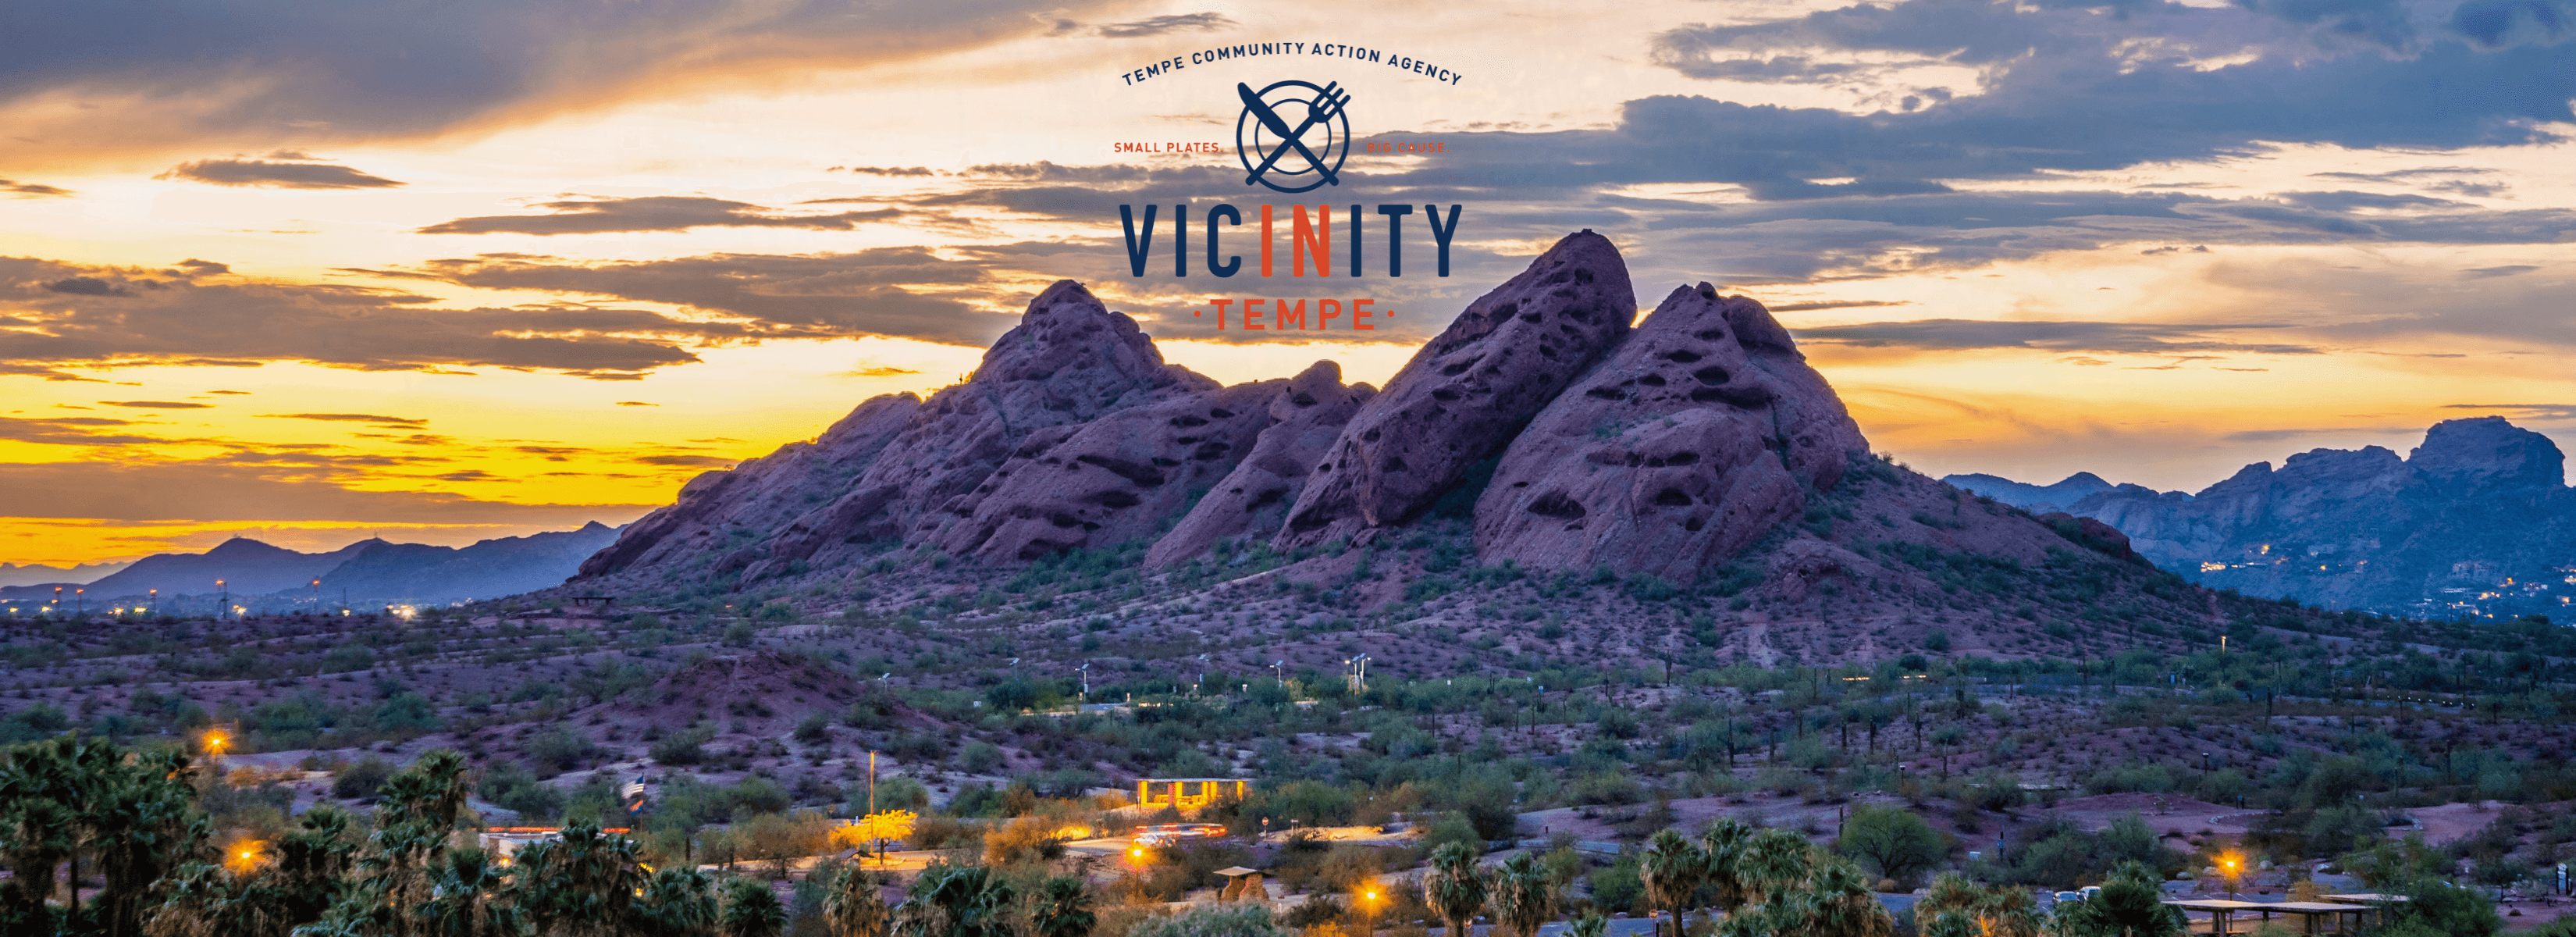 Stay tuned for VICINITY Tempe 2023!